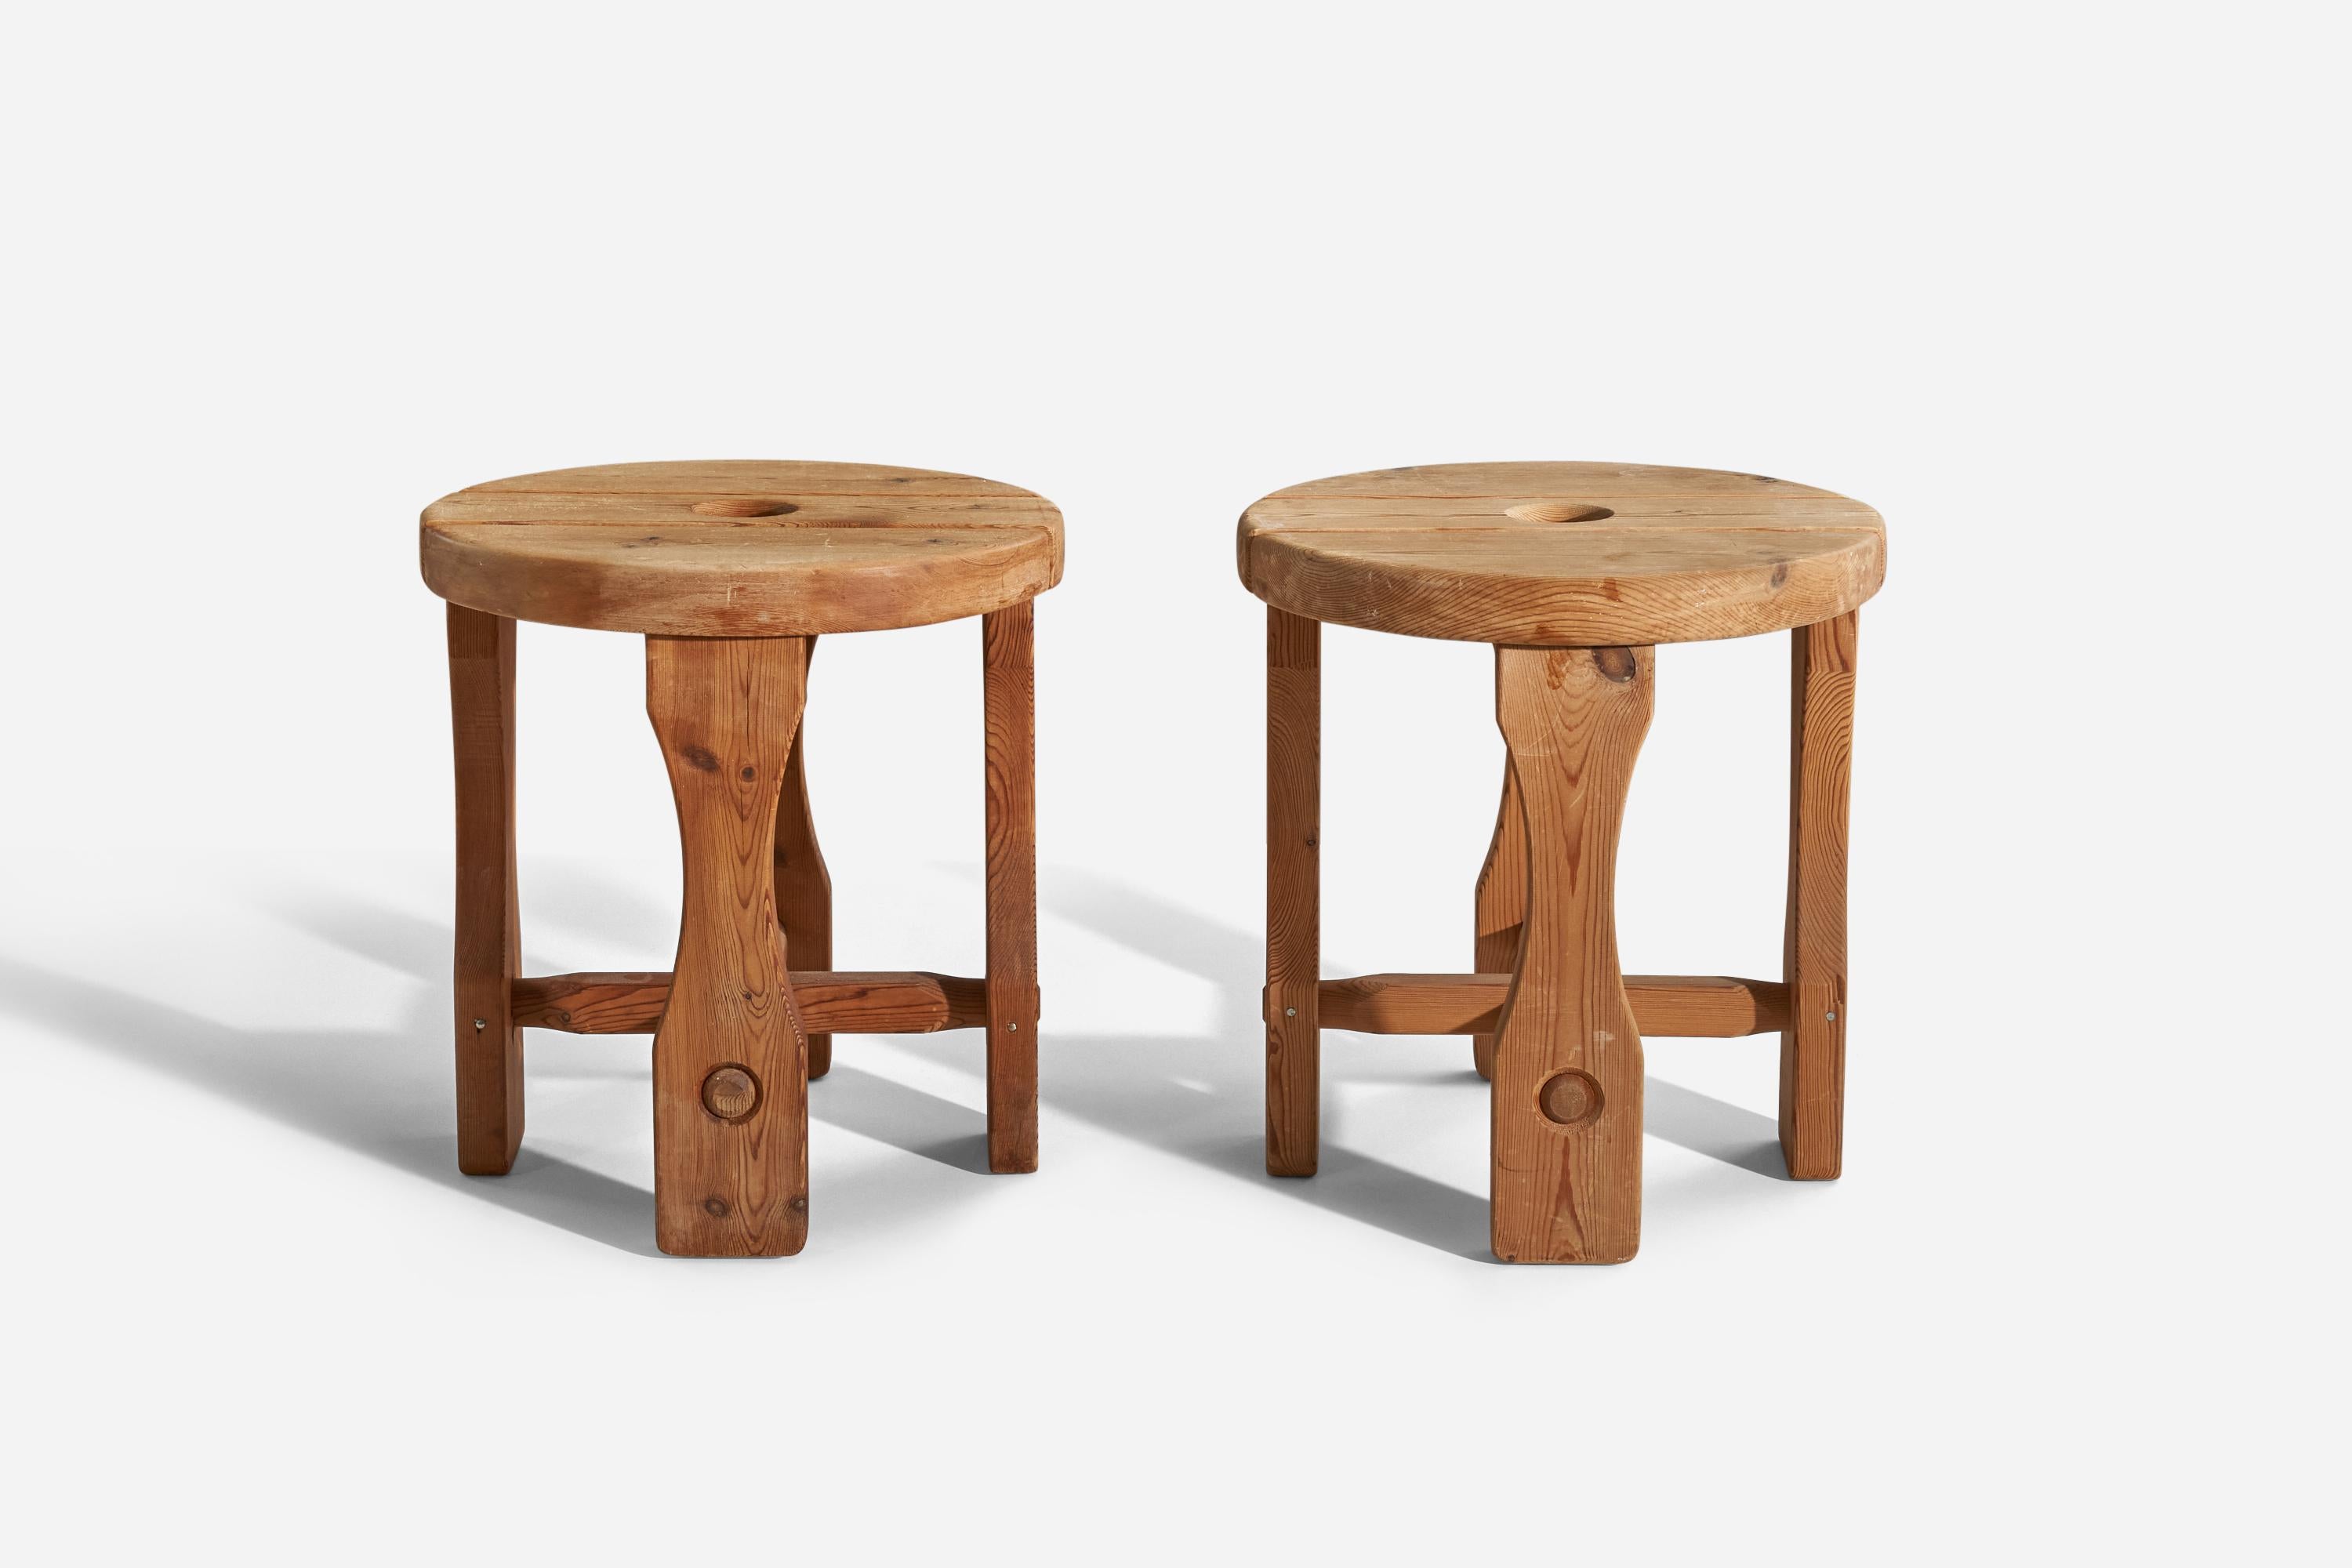 A pair of pine stools designed and produced in Sweden, 1940s.